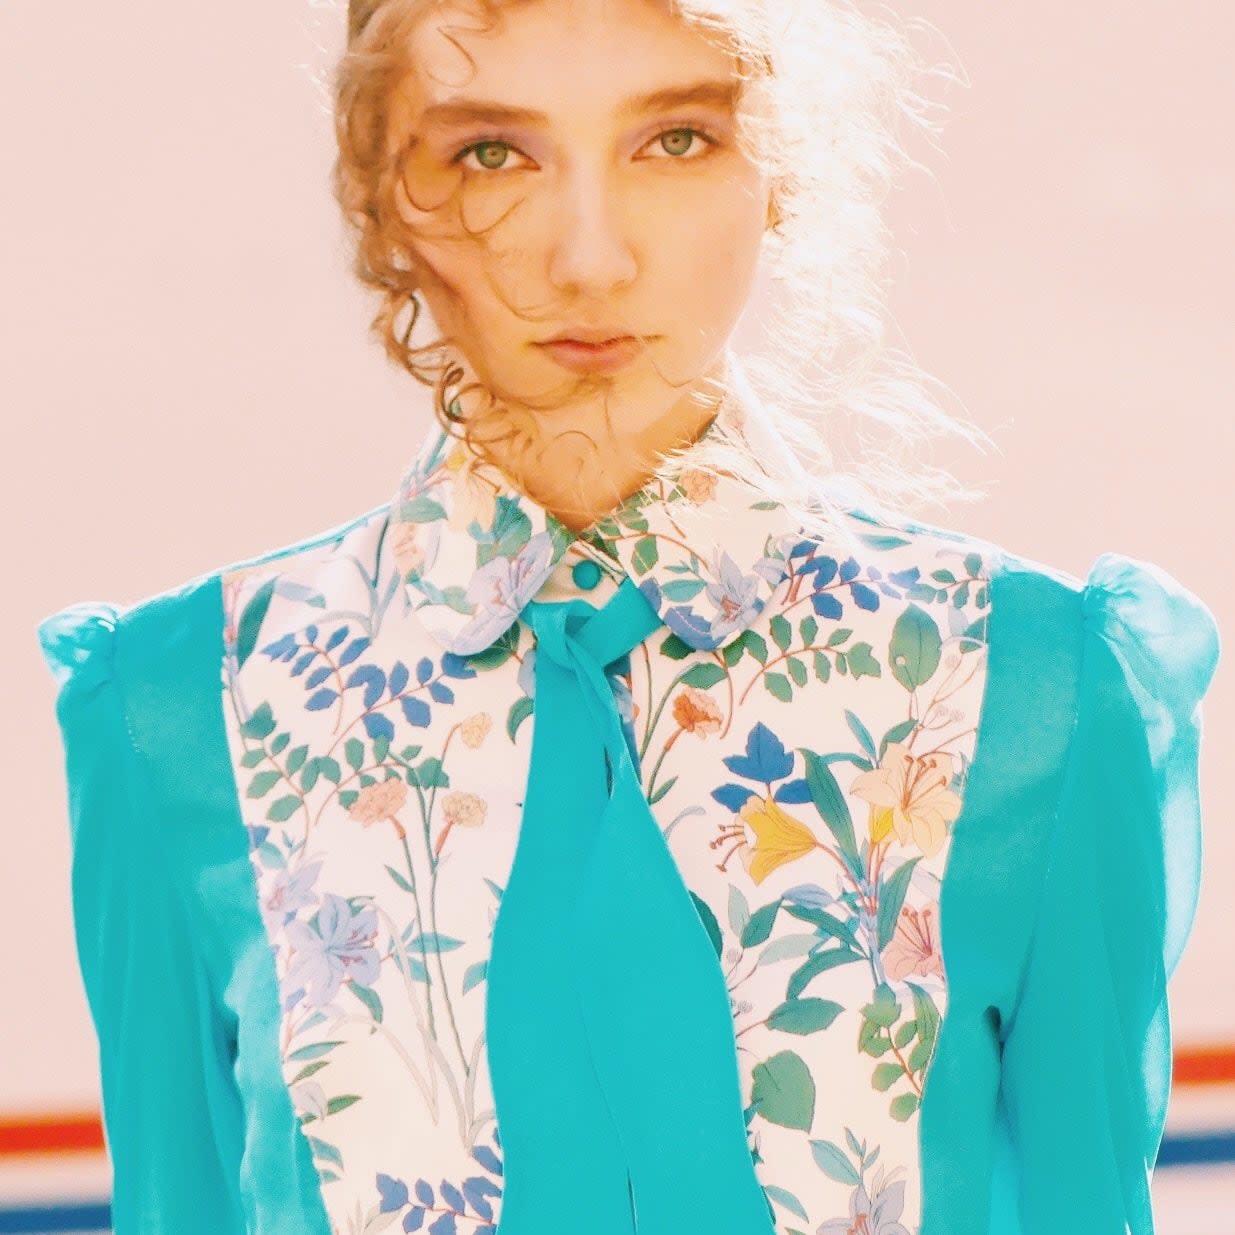  Edeltrud Hofmann's floral pussy-bow blouse - Copyright 2018. All rights reserved.